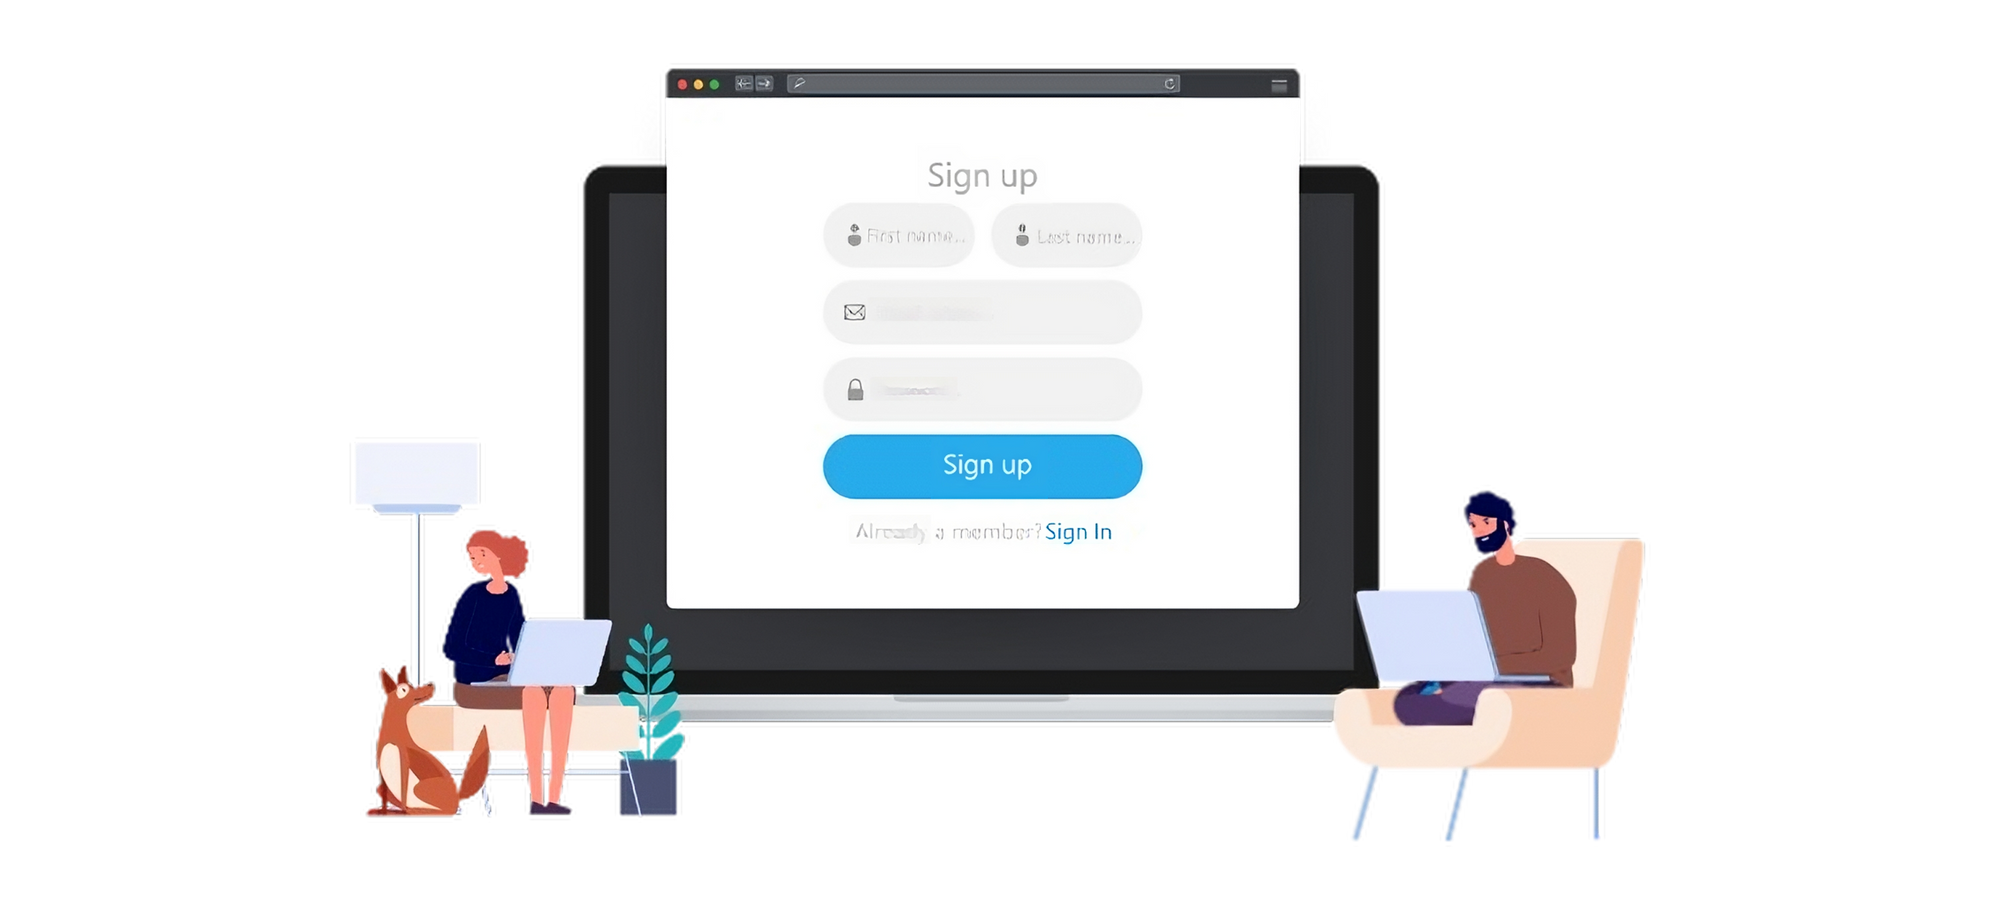 12 powerful tips for sign-up and login page design